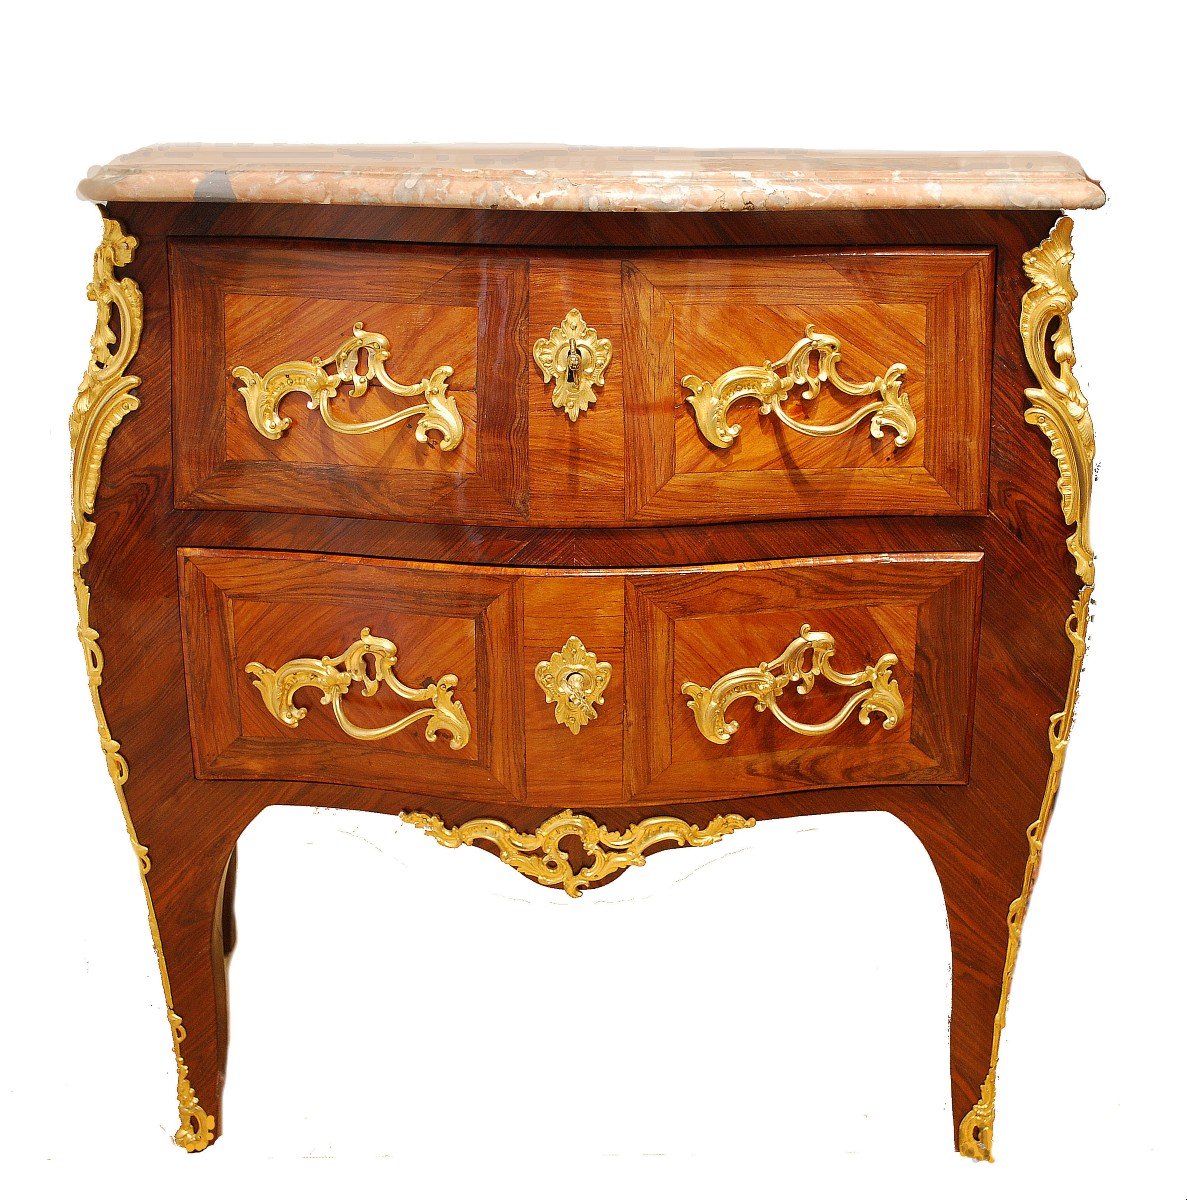 Louis XV Commode Circa 1765 Stamped I * Chenevat Jacques Chenevat Master December 6, 1763